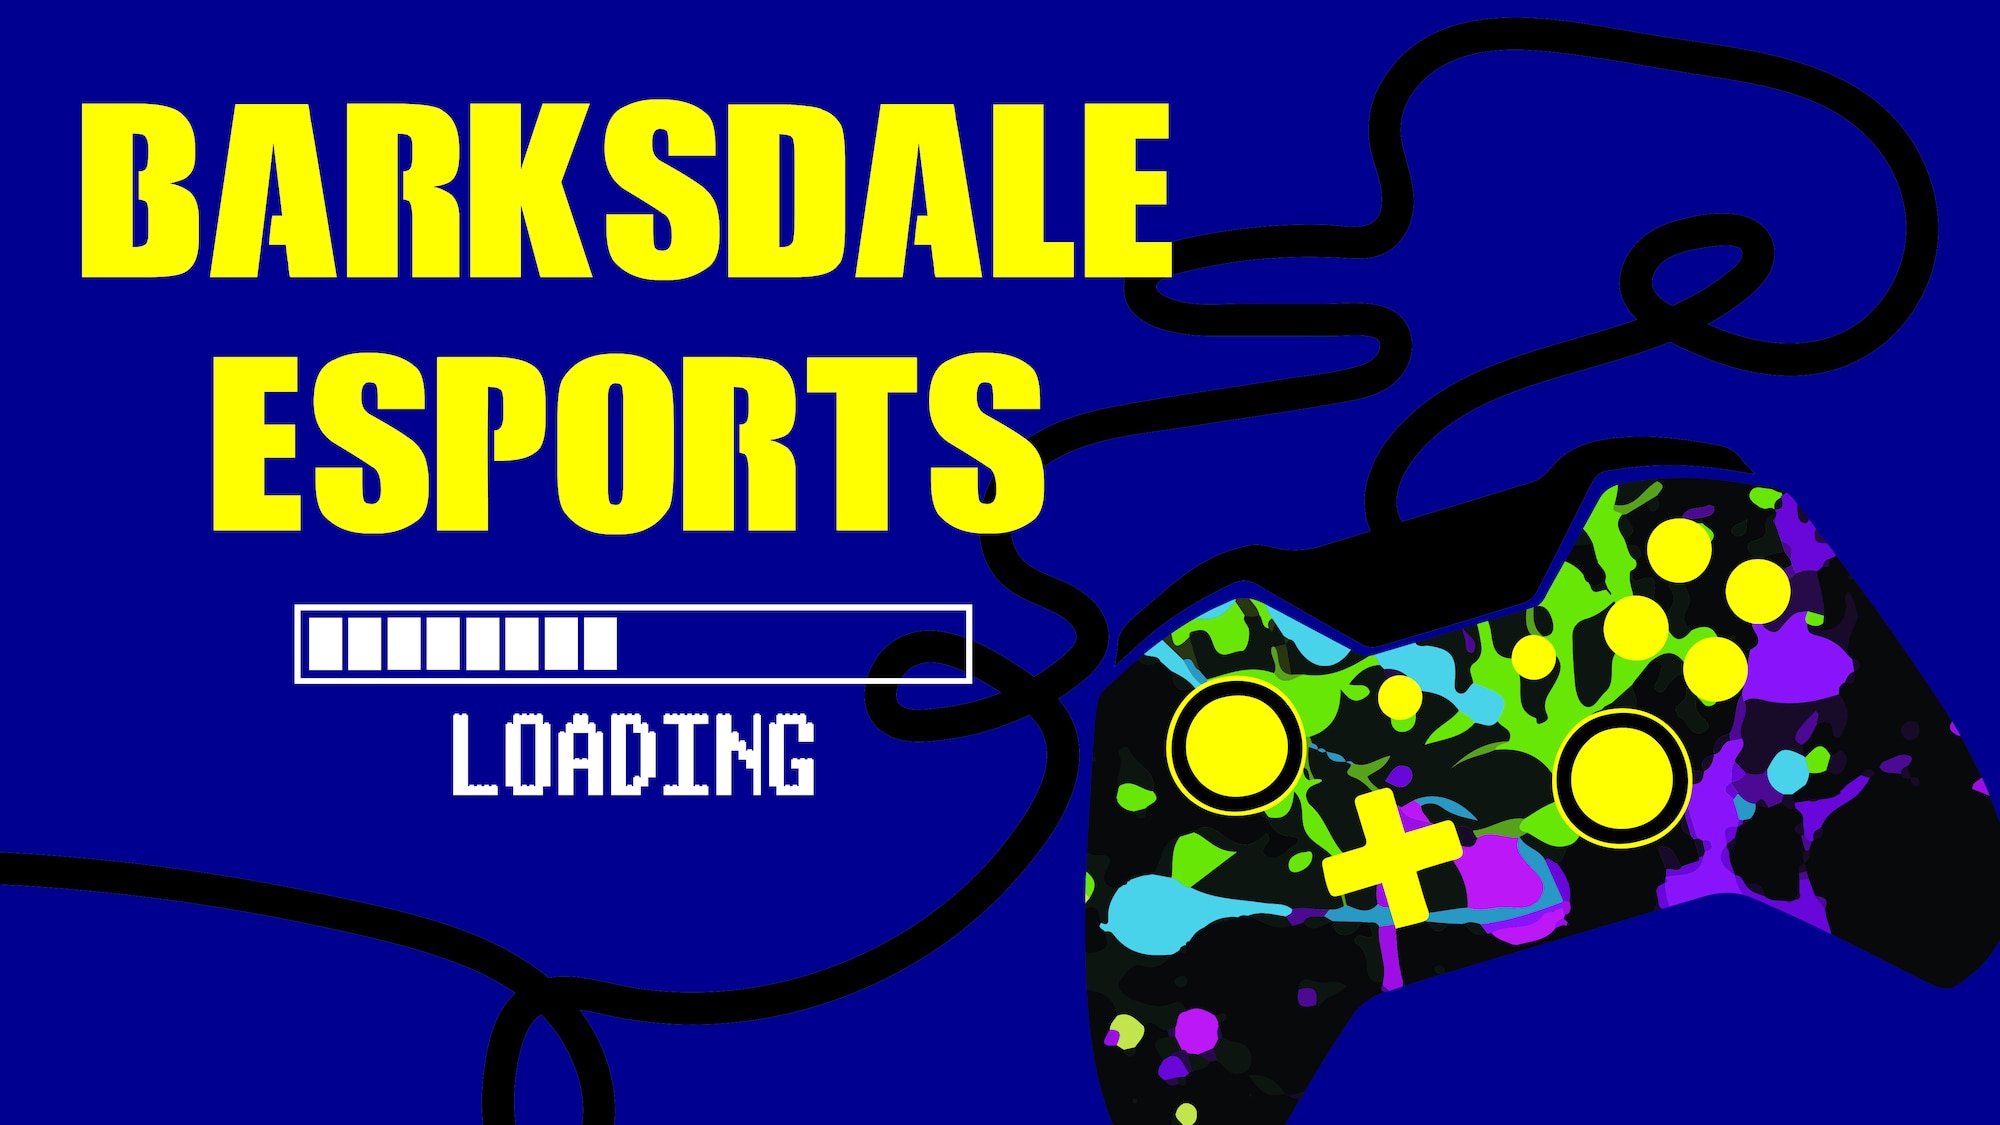 A Barksdale esports graphic is pictured. (U.S. Air Force graphic by 2nd Lt. Lindsey T. Heflin)